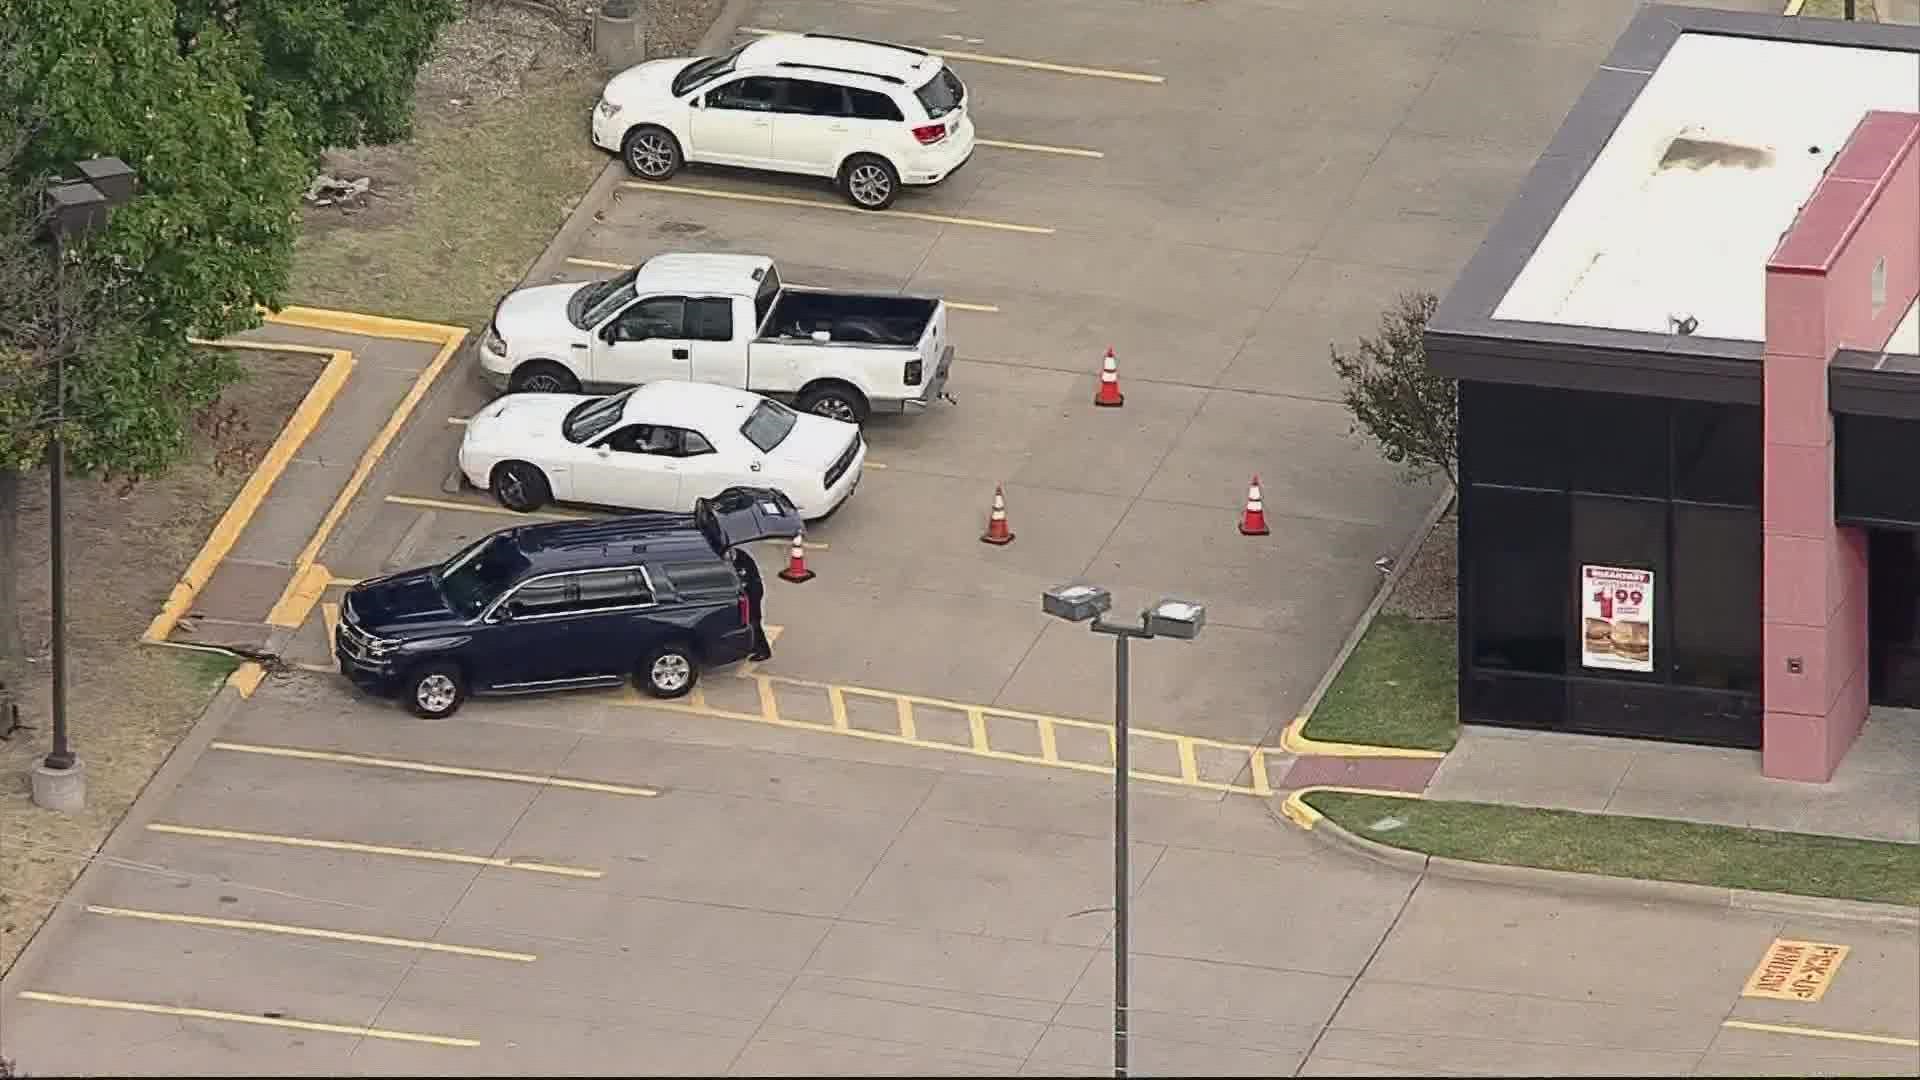 Just before 2:30 p.m. Monday, Allen police officers responded to a disturbance call in the parking lot of a Wendy’s, located at 601 W. McDermott Drive.